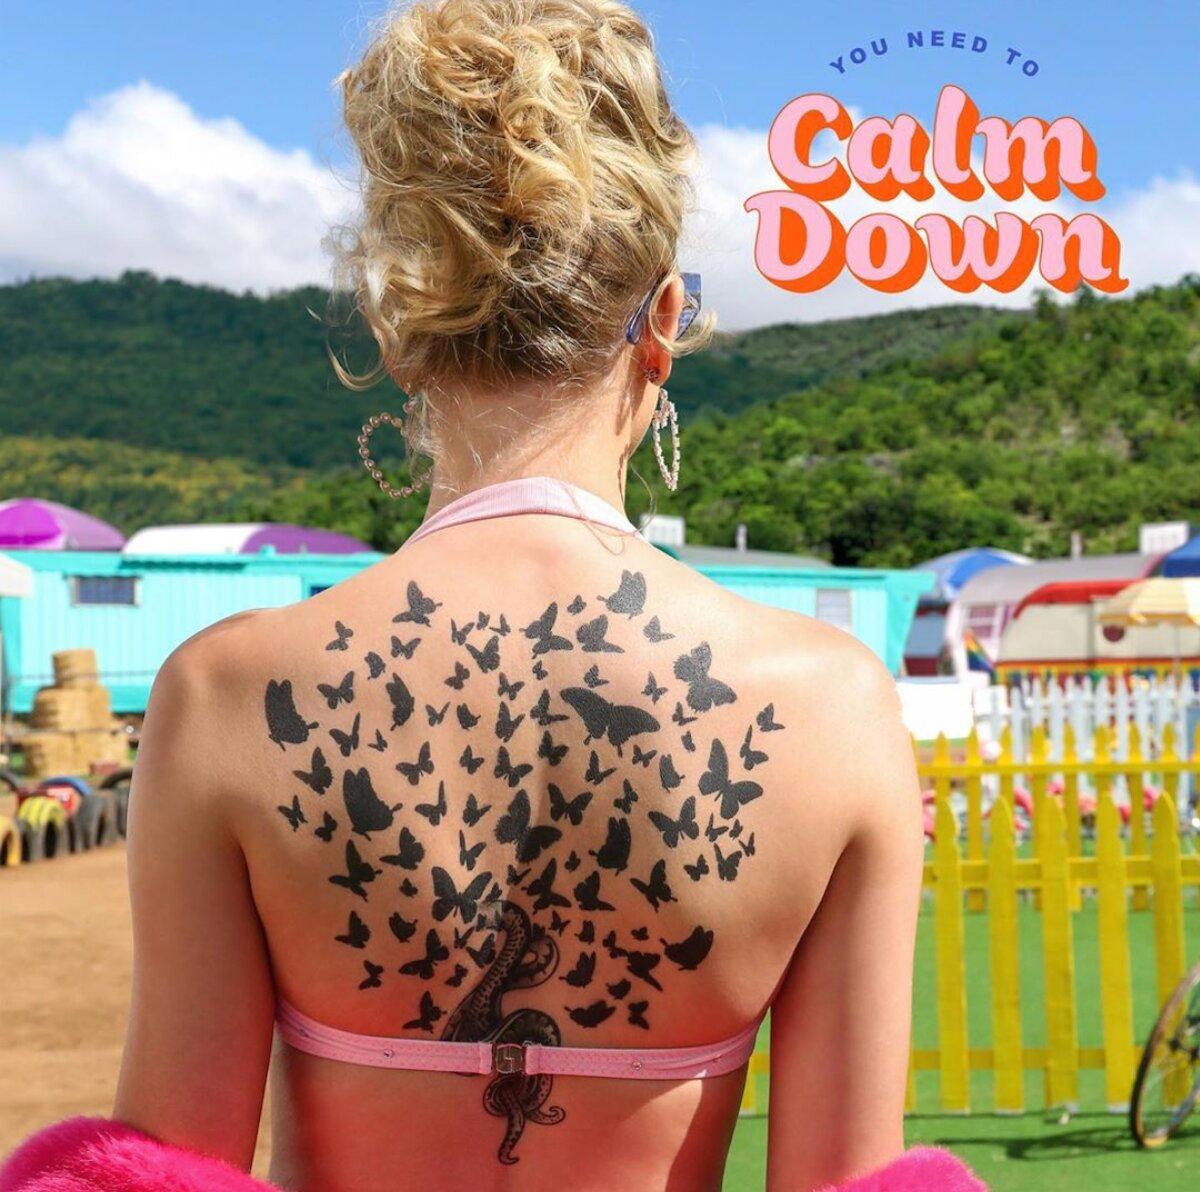 Did Taylor Swift Get a Tattoo? Check out the Giant Artwork on Her Back